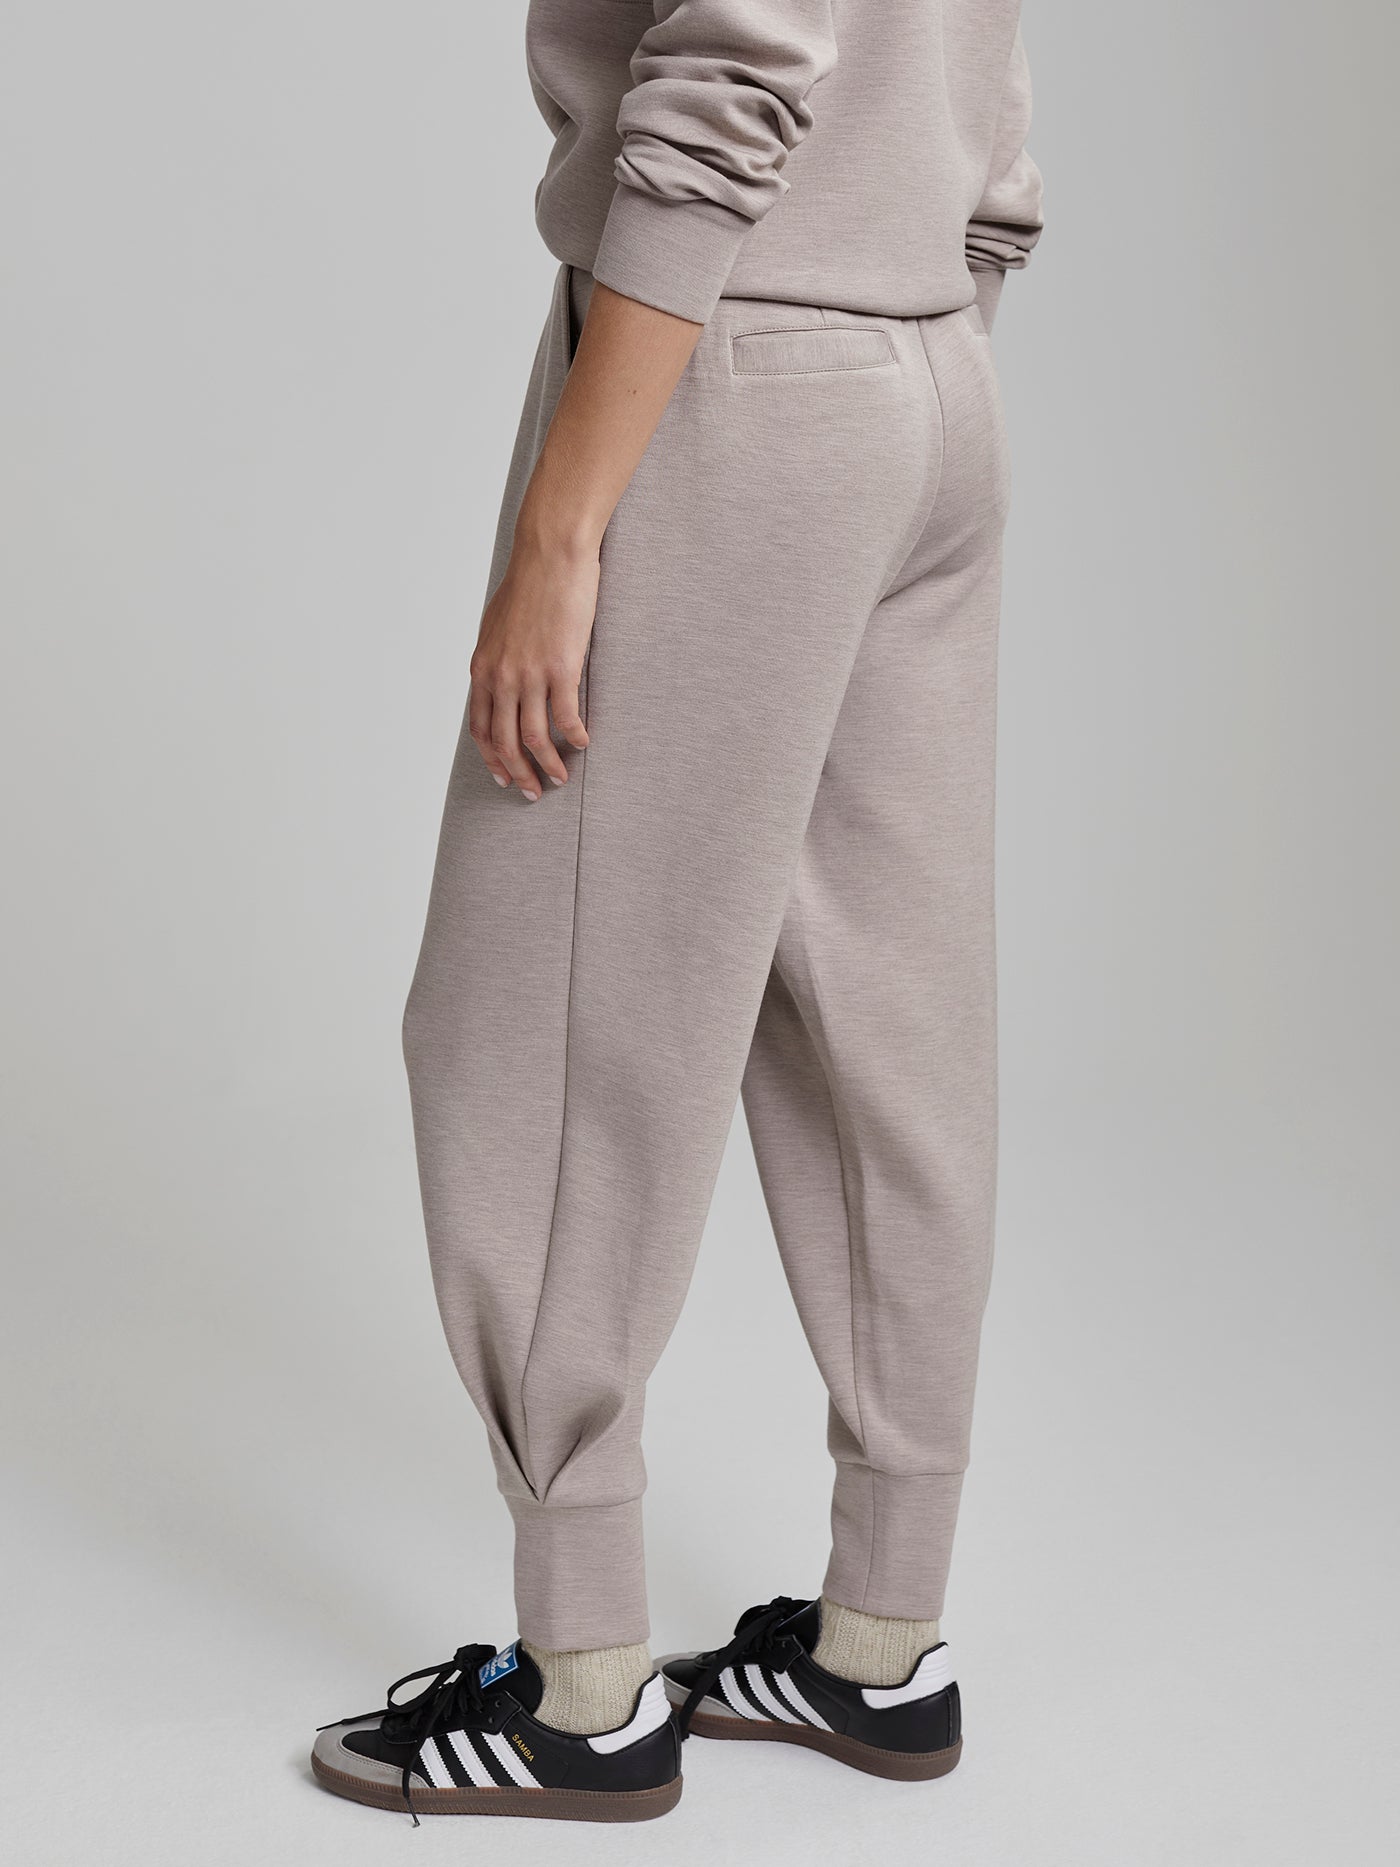 Varley - Custer Relaxed Sweatpants - Taupe Marl – Eco & Active